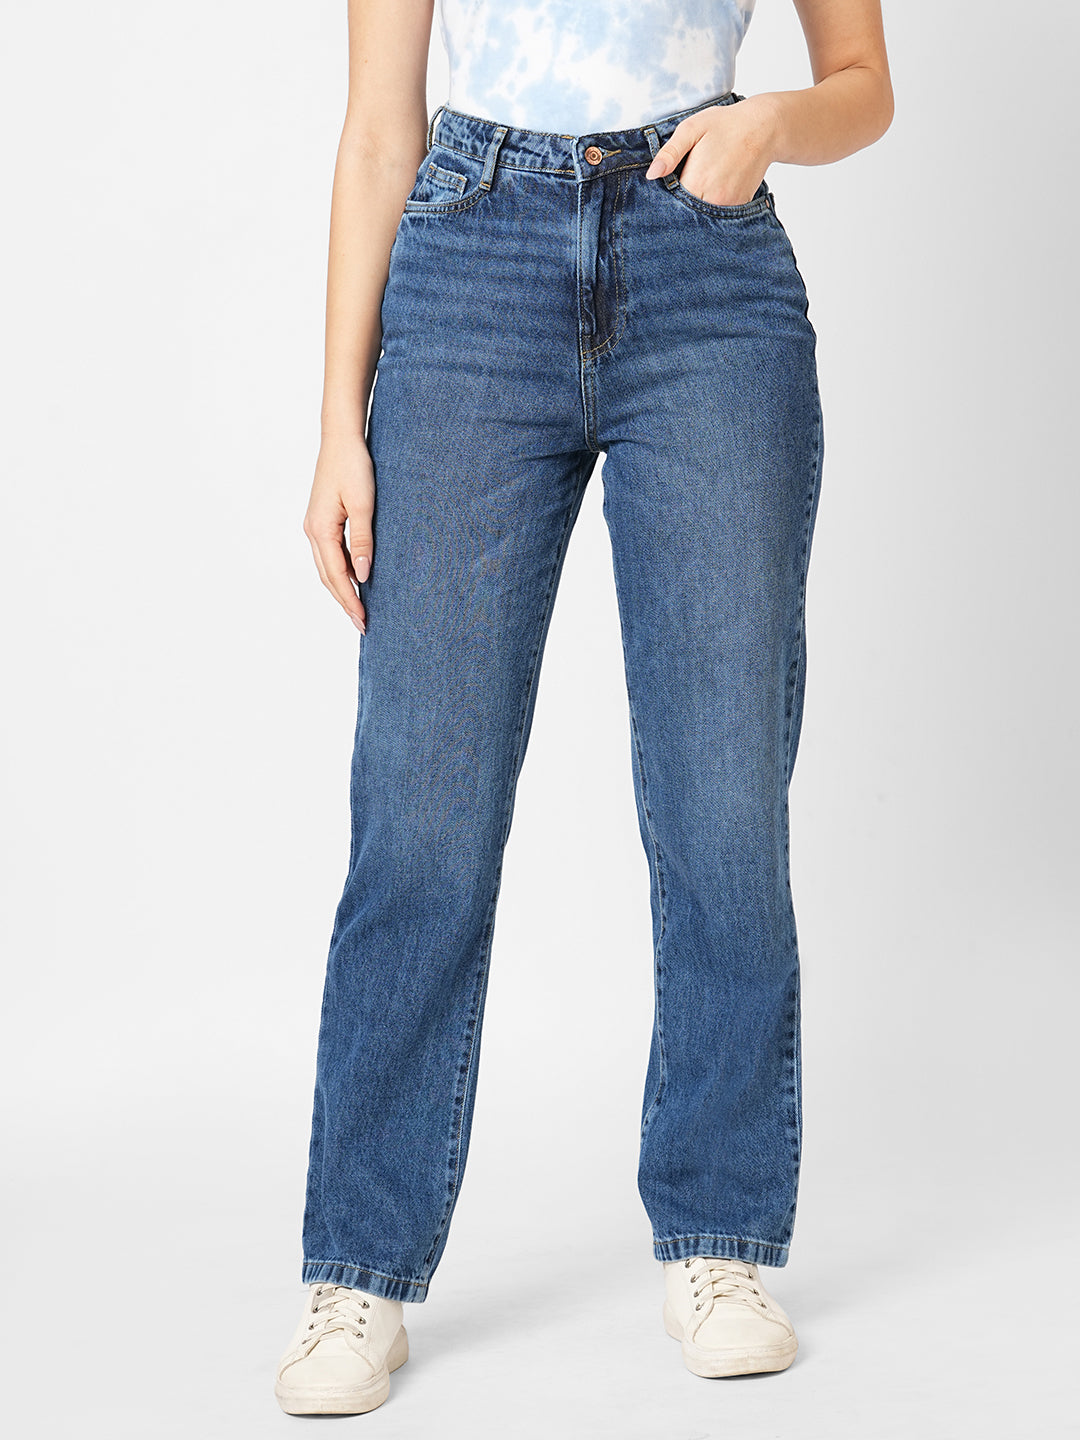 Shop Mom Fit Jeans for Women Online at Best Price - Kraus Jeans